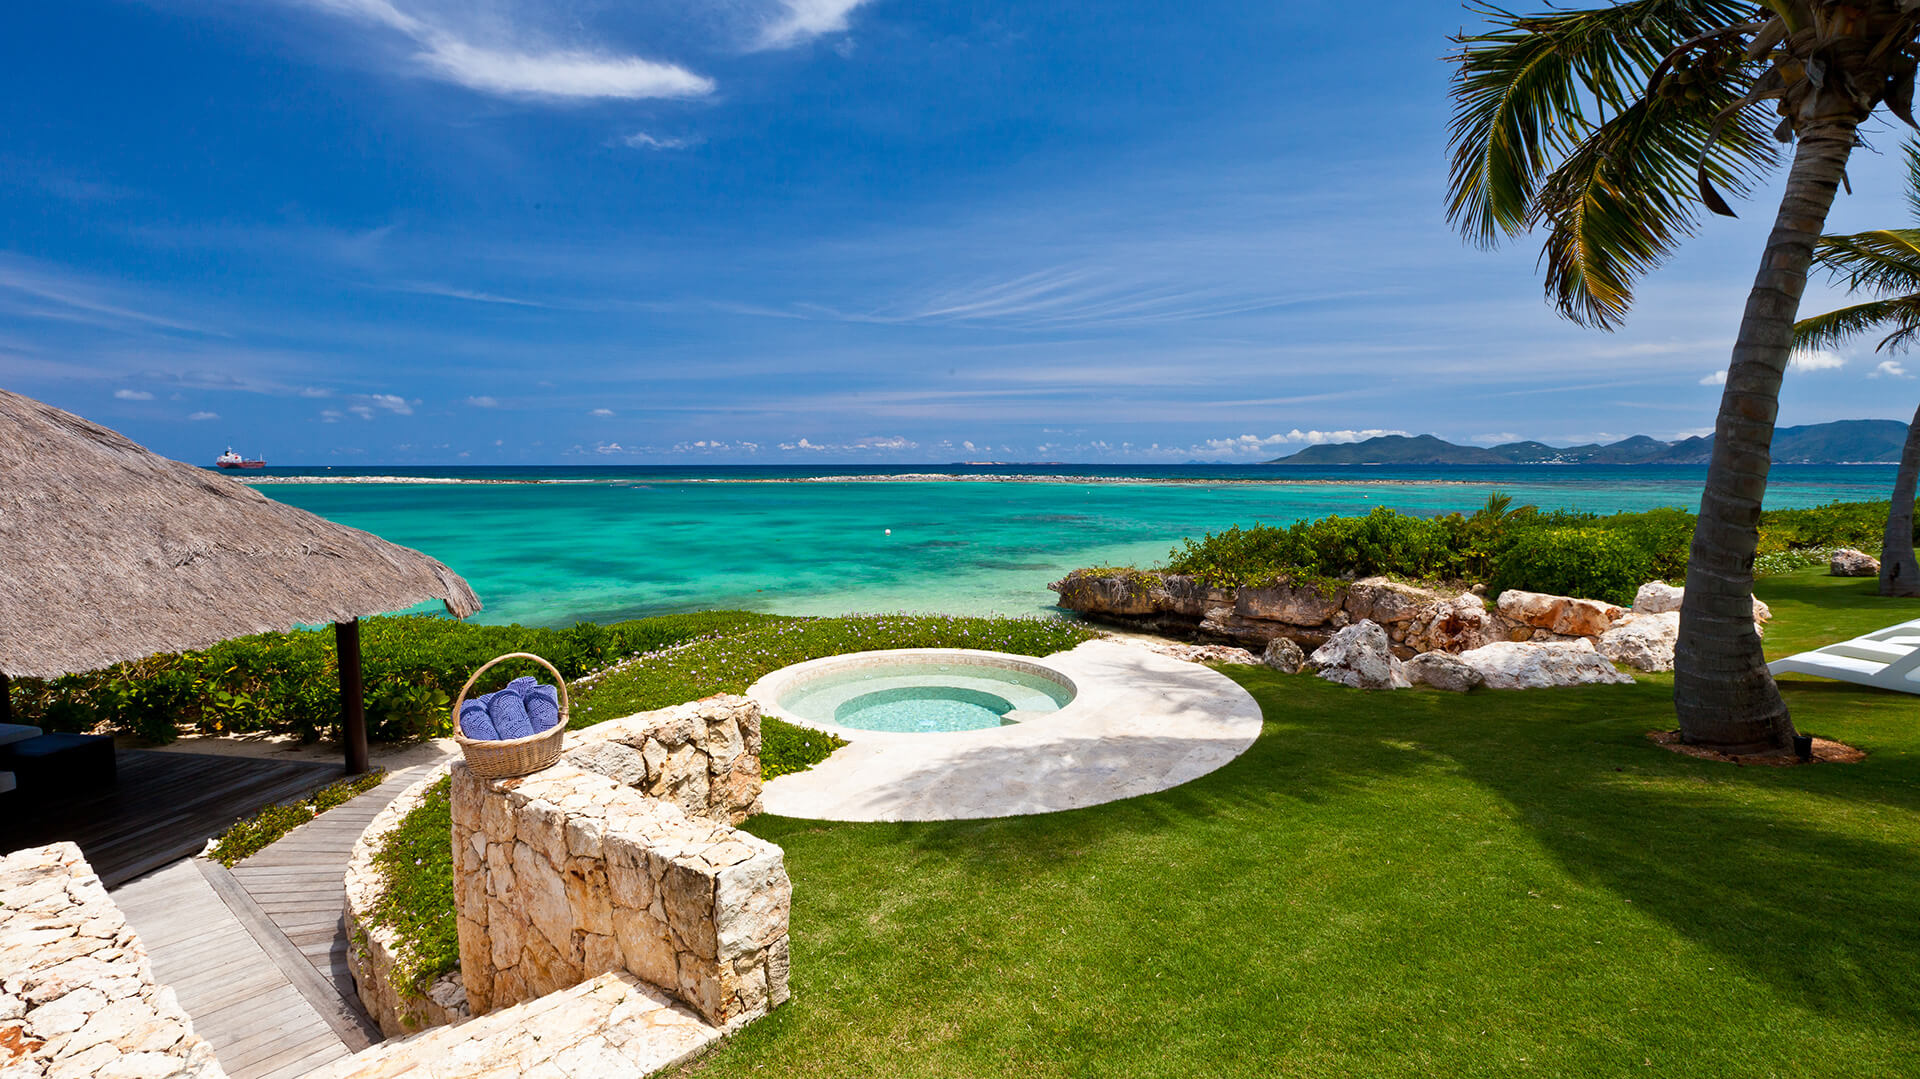 This paradise is all yours when you choose Le Bleu Villa on Anguilla.